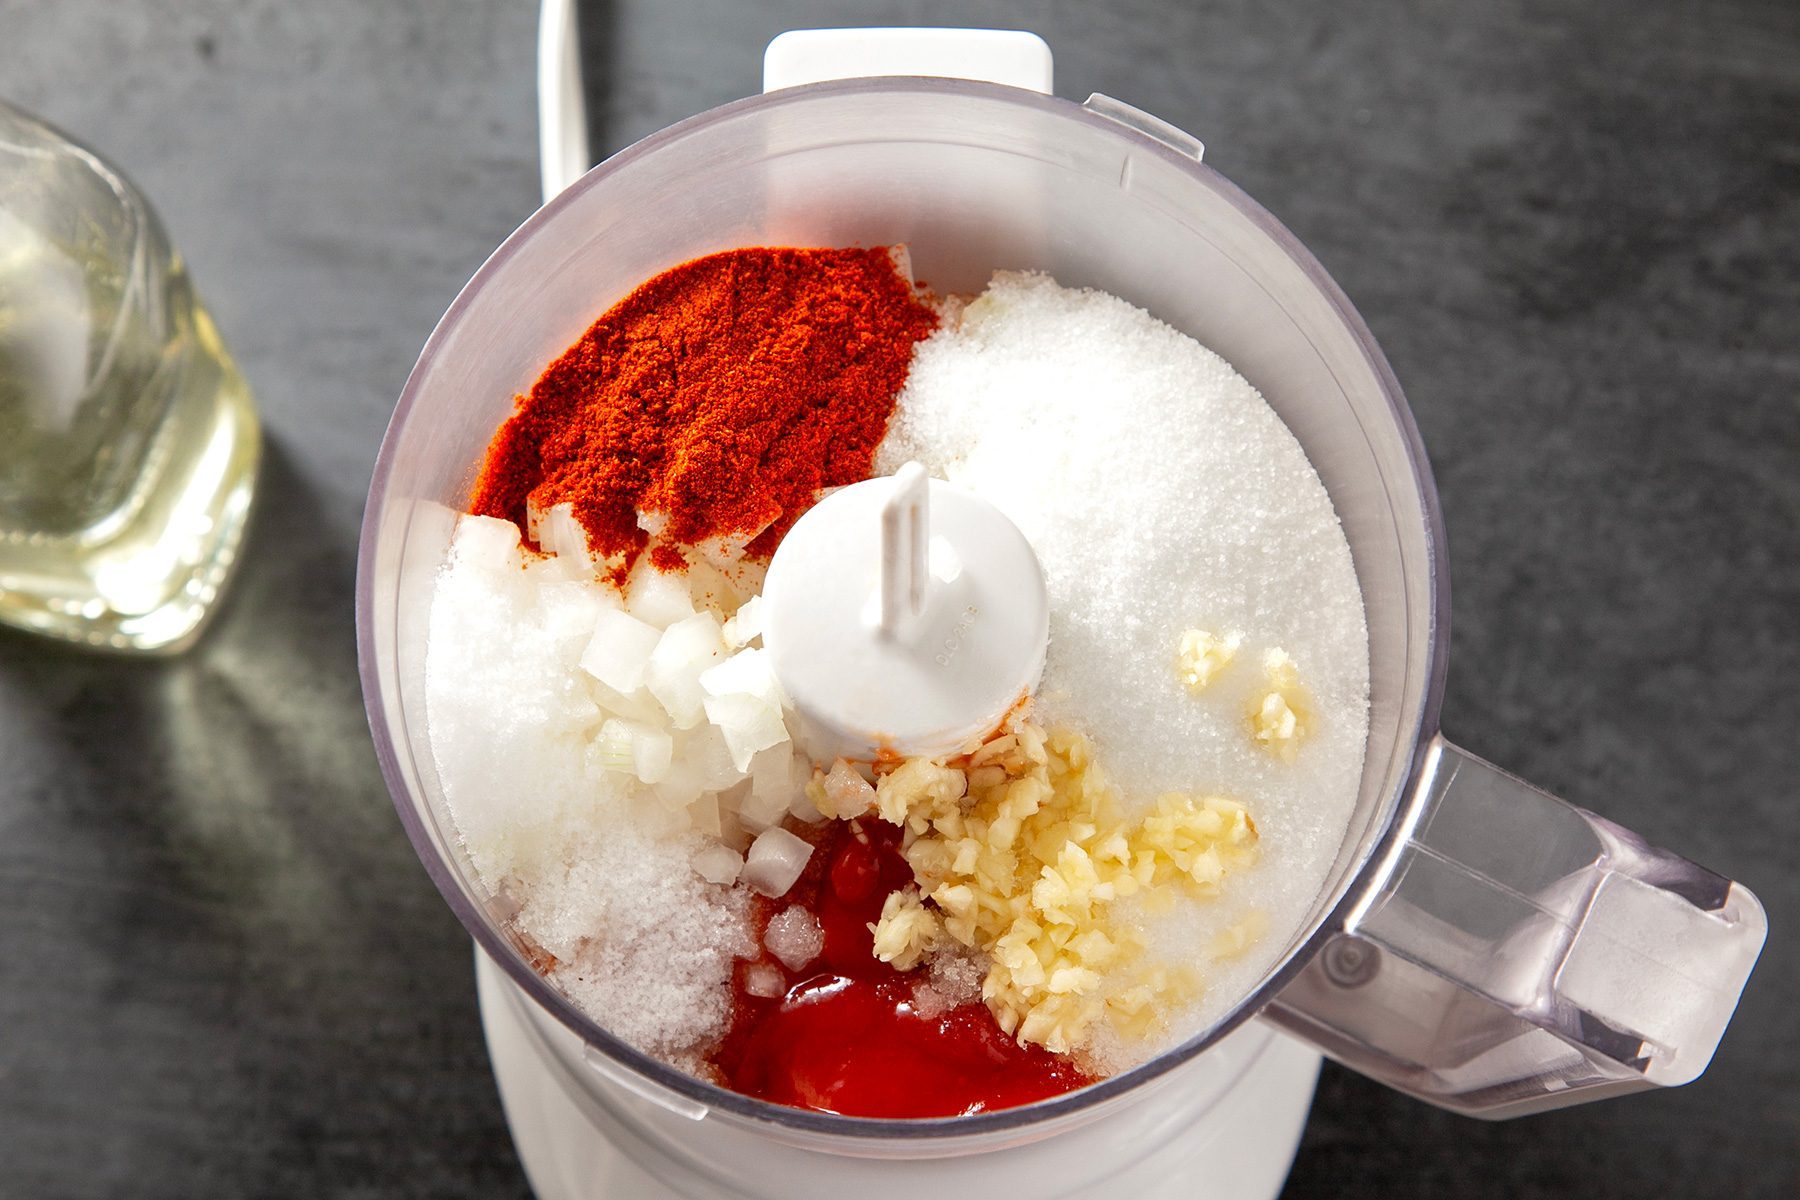 combine all the ingredients a blender or food processor